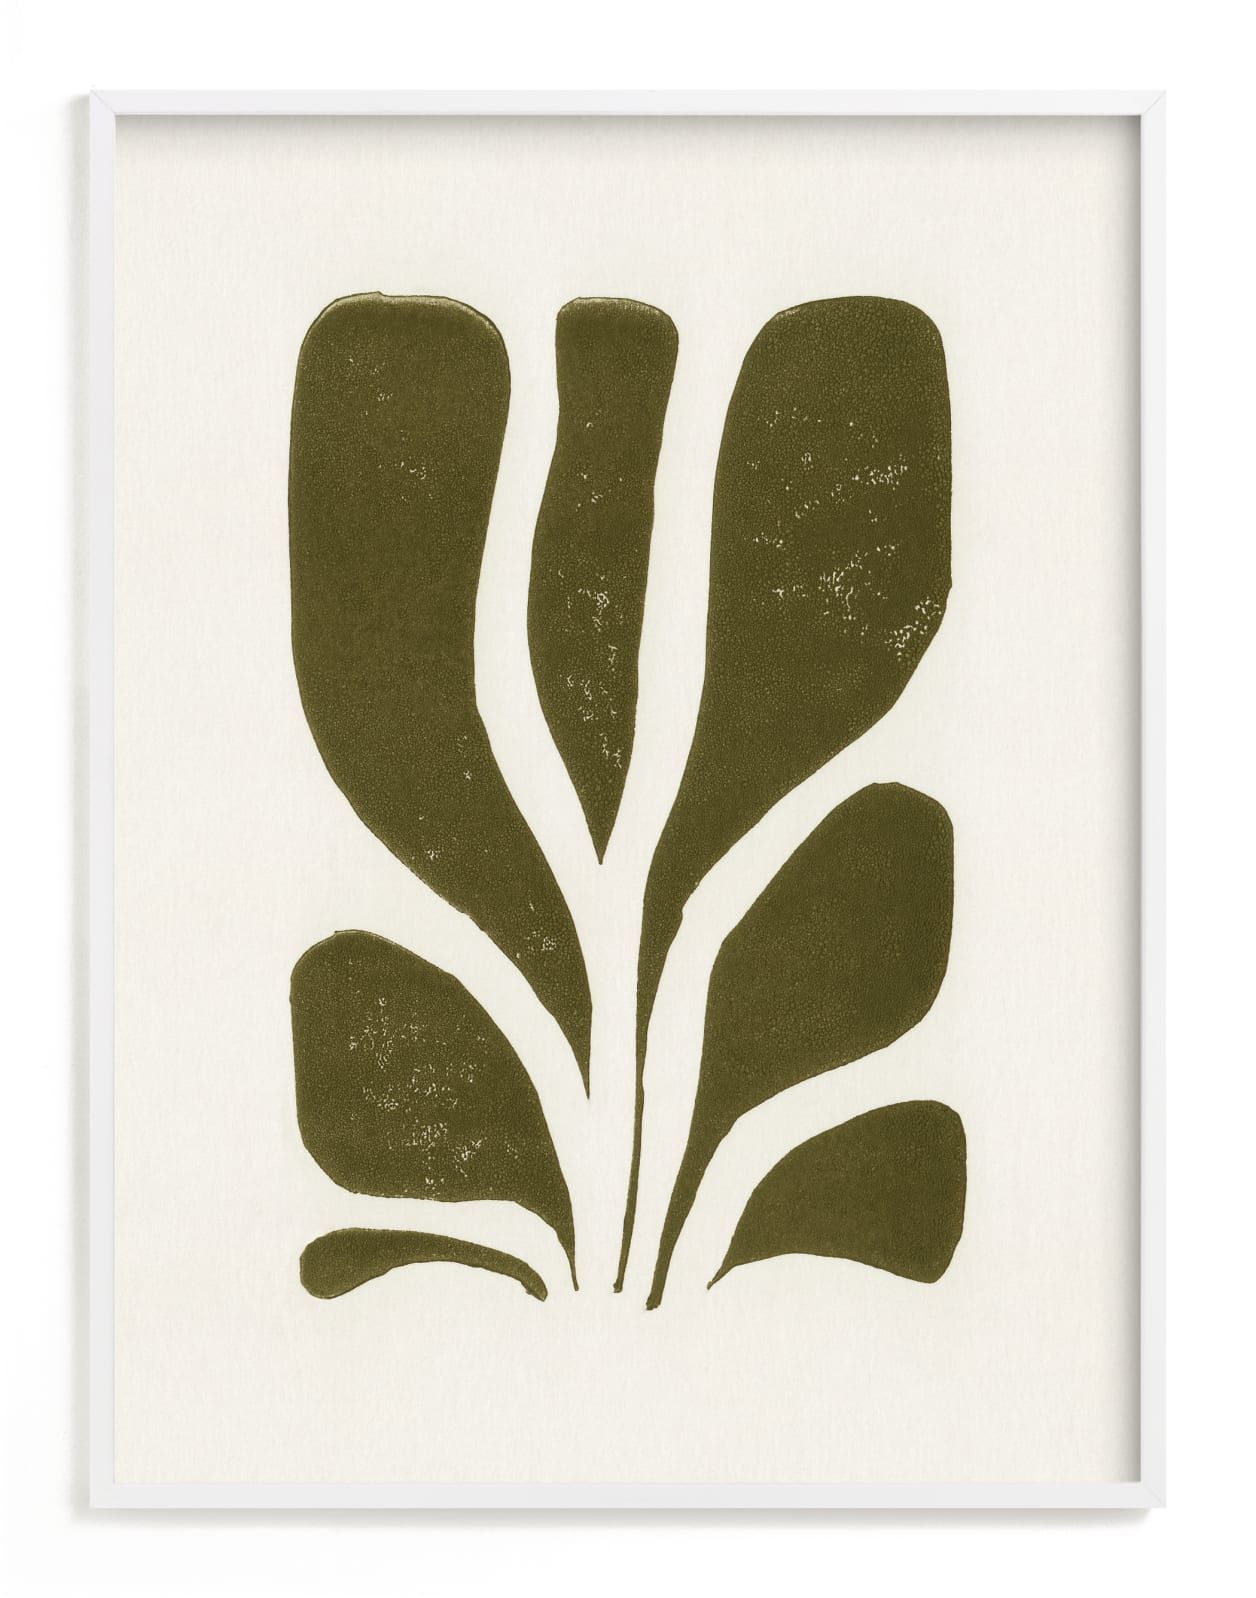 "Growth II" - Graphic Limited Edition Art Print by Alisa Galitsyna. | Minted